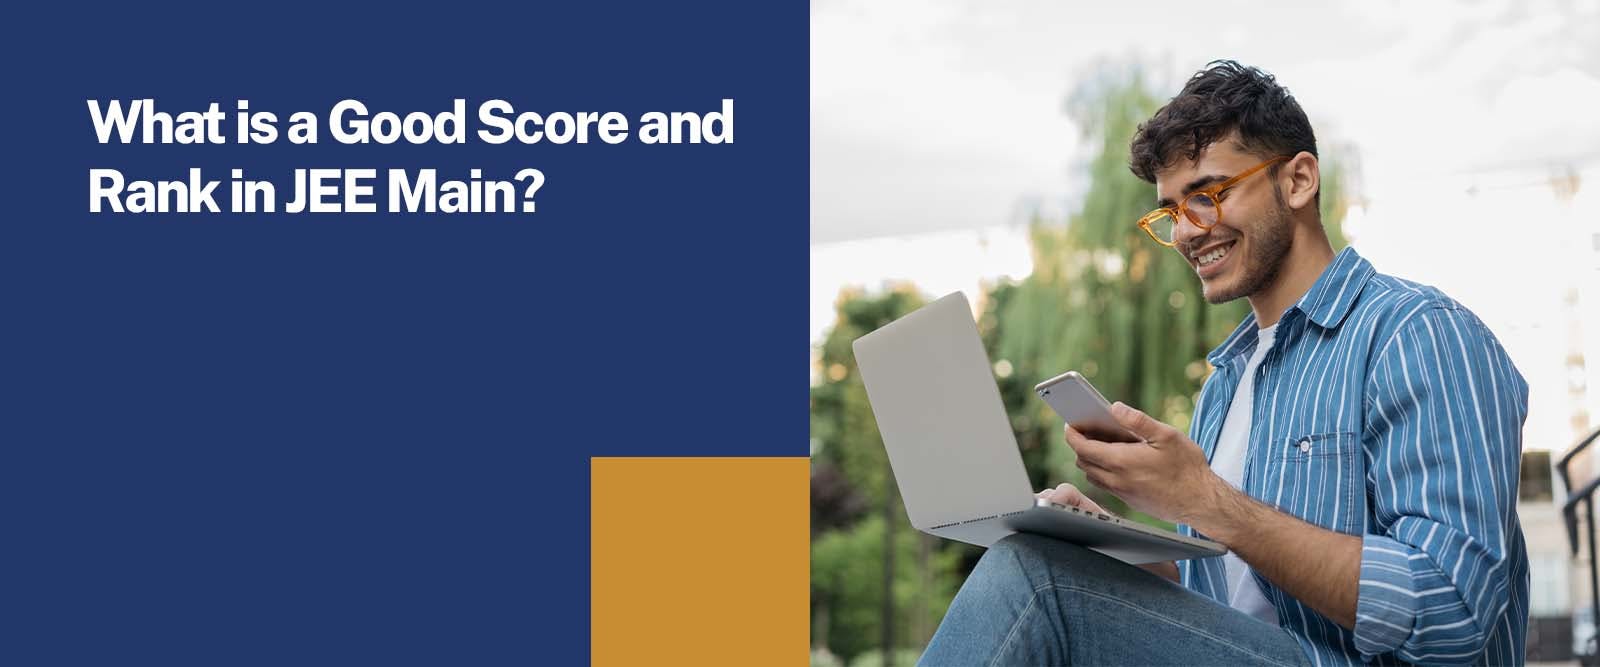 What is a Good Score and Rank in JEE Main?